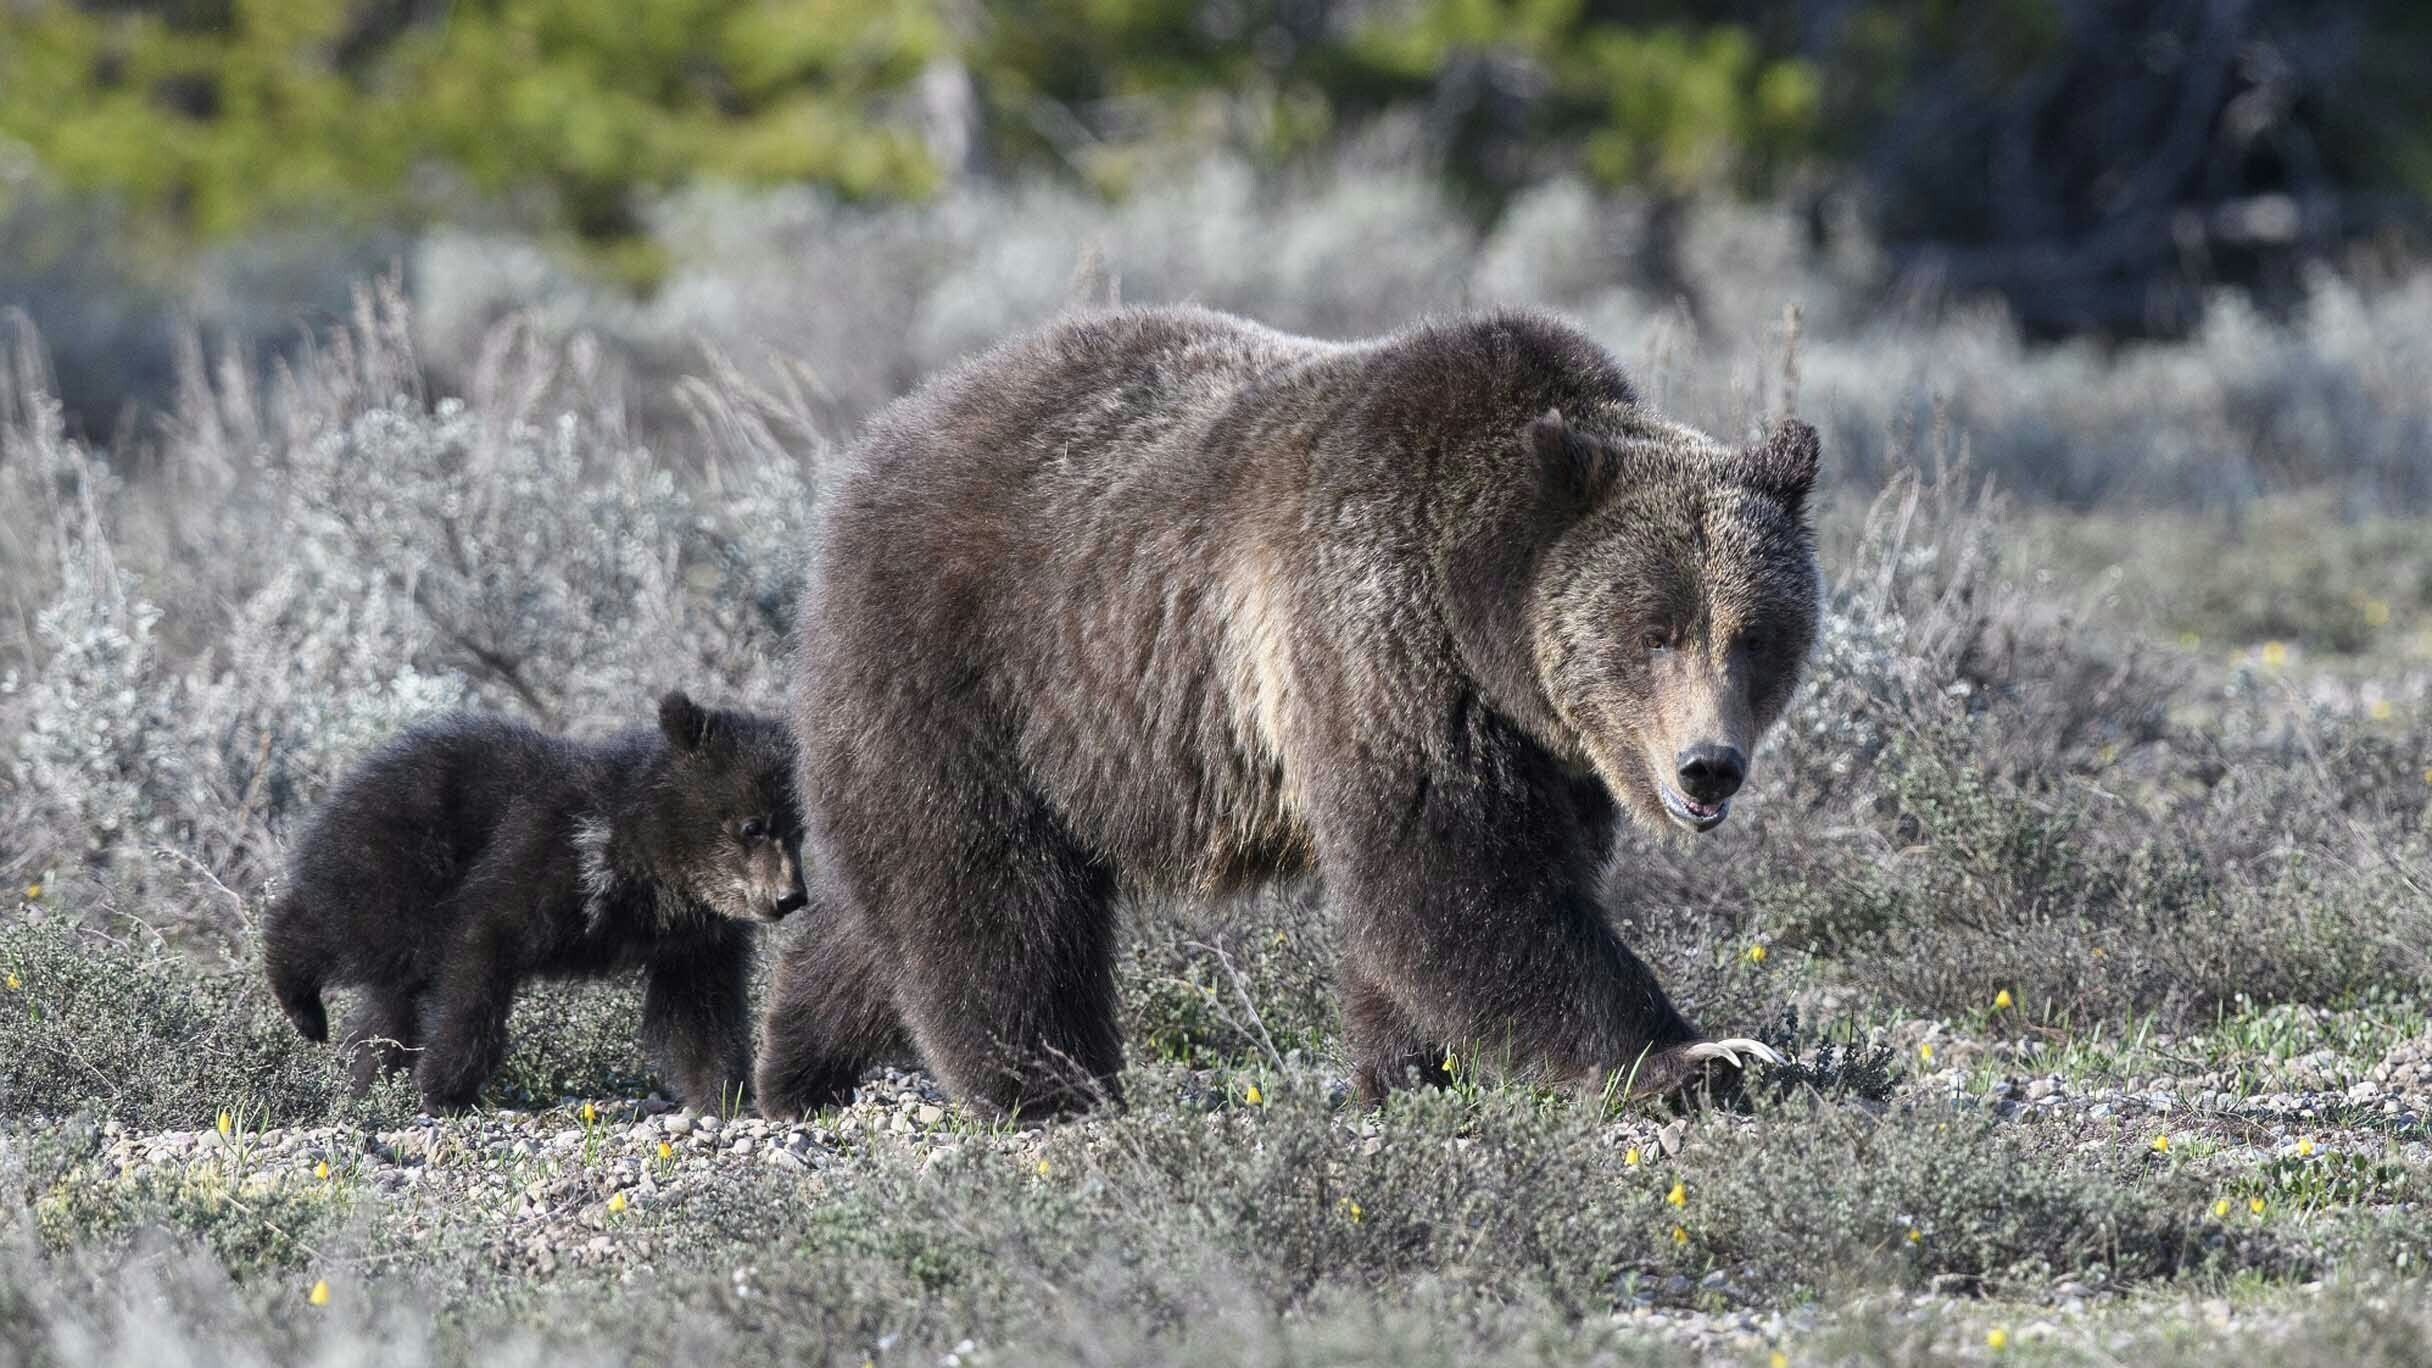 There's a reason Grizzly 399 has lived to the ripe age of 27, and counting. She, and other Wyoming grizzlies, are smarter than average bears. (Photo is owned by Jorn Vangoidtsenhoven and may not be reproduced)